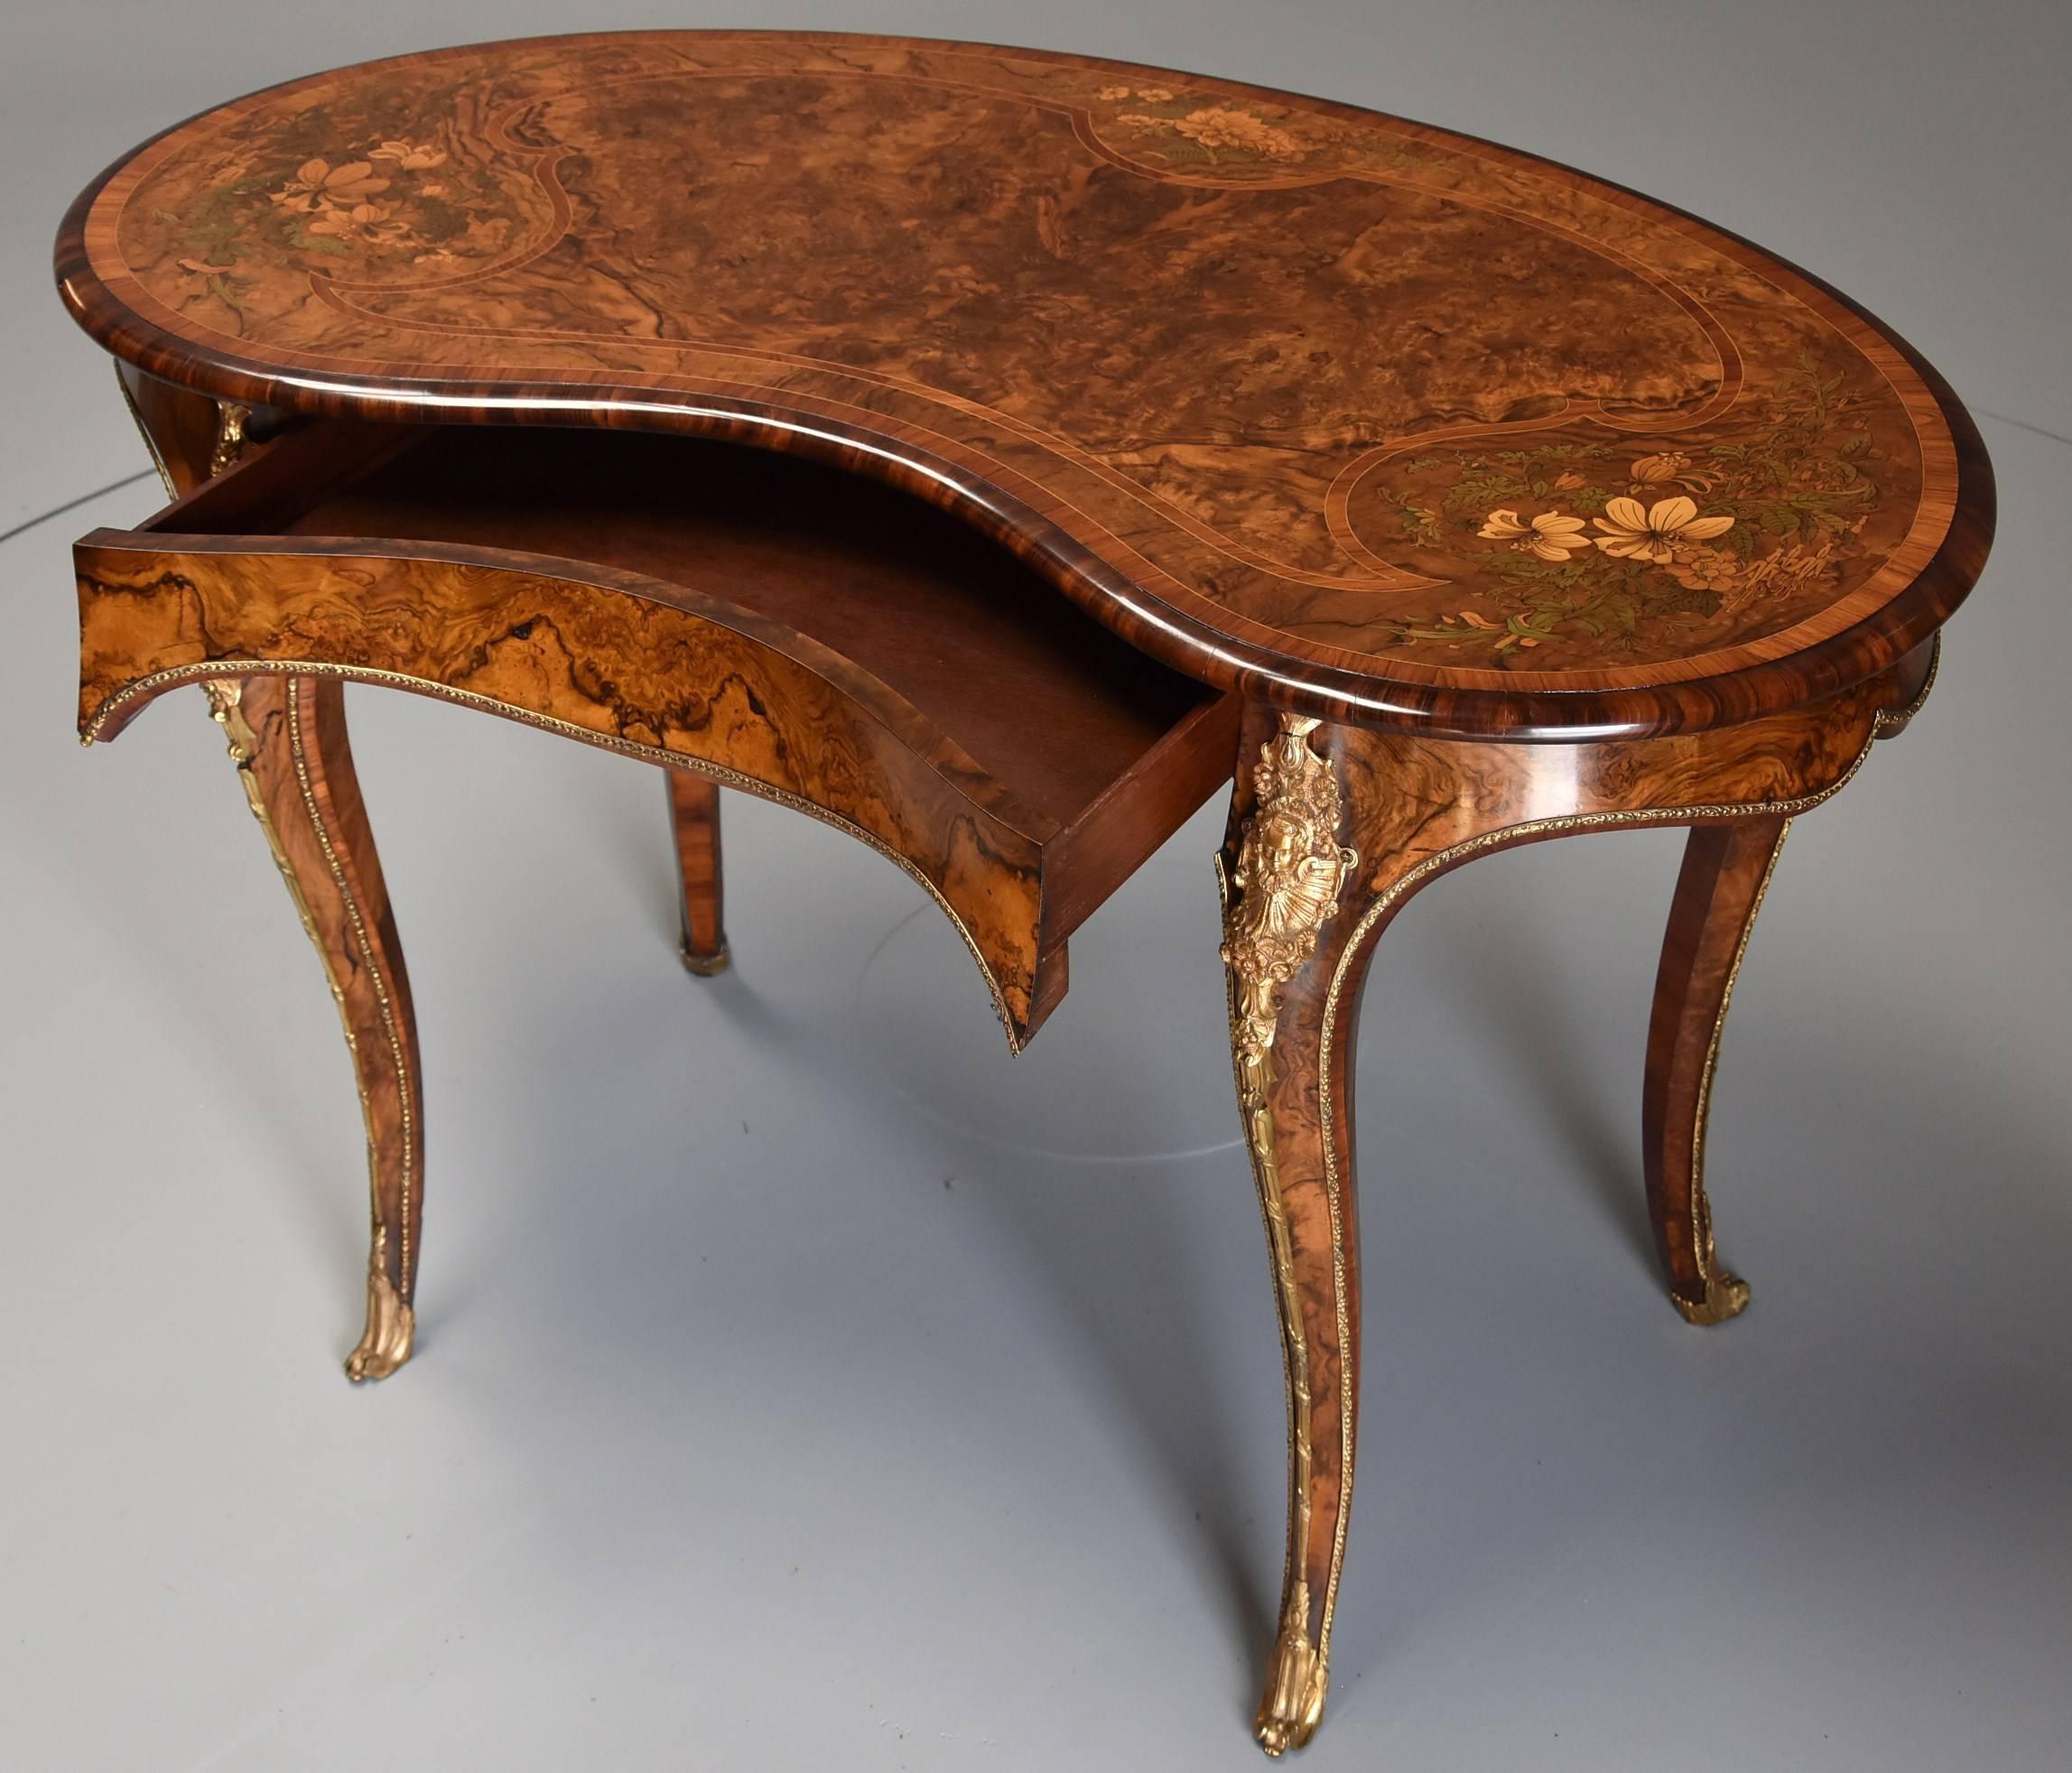 Superb Quality Mid-19th Century Burr Walnut and Marquetry Kidney Shape Table In Good Condition For Sale In Suffolk, GB